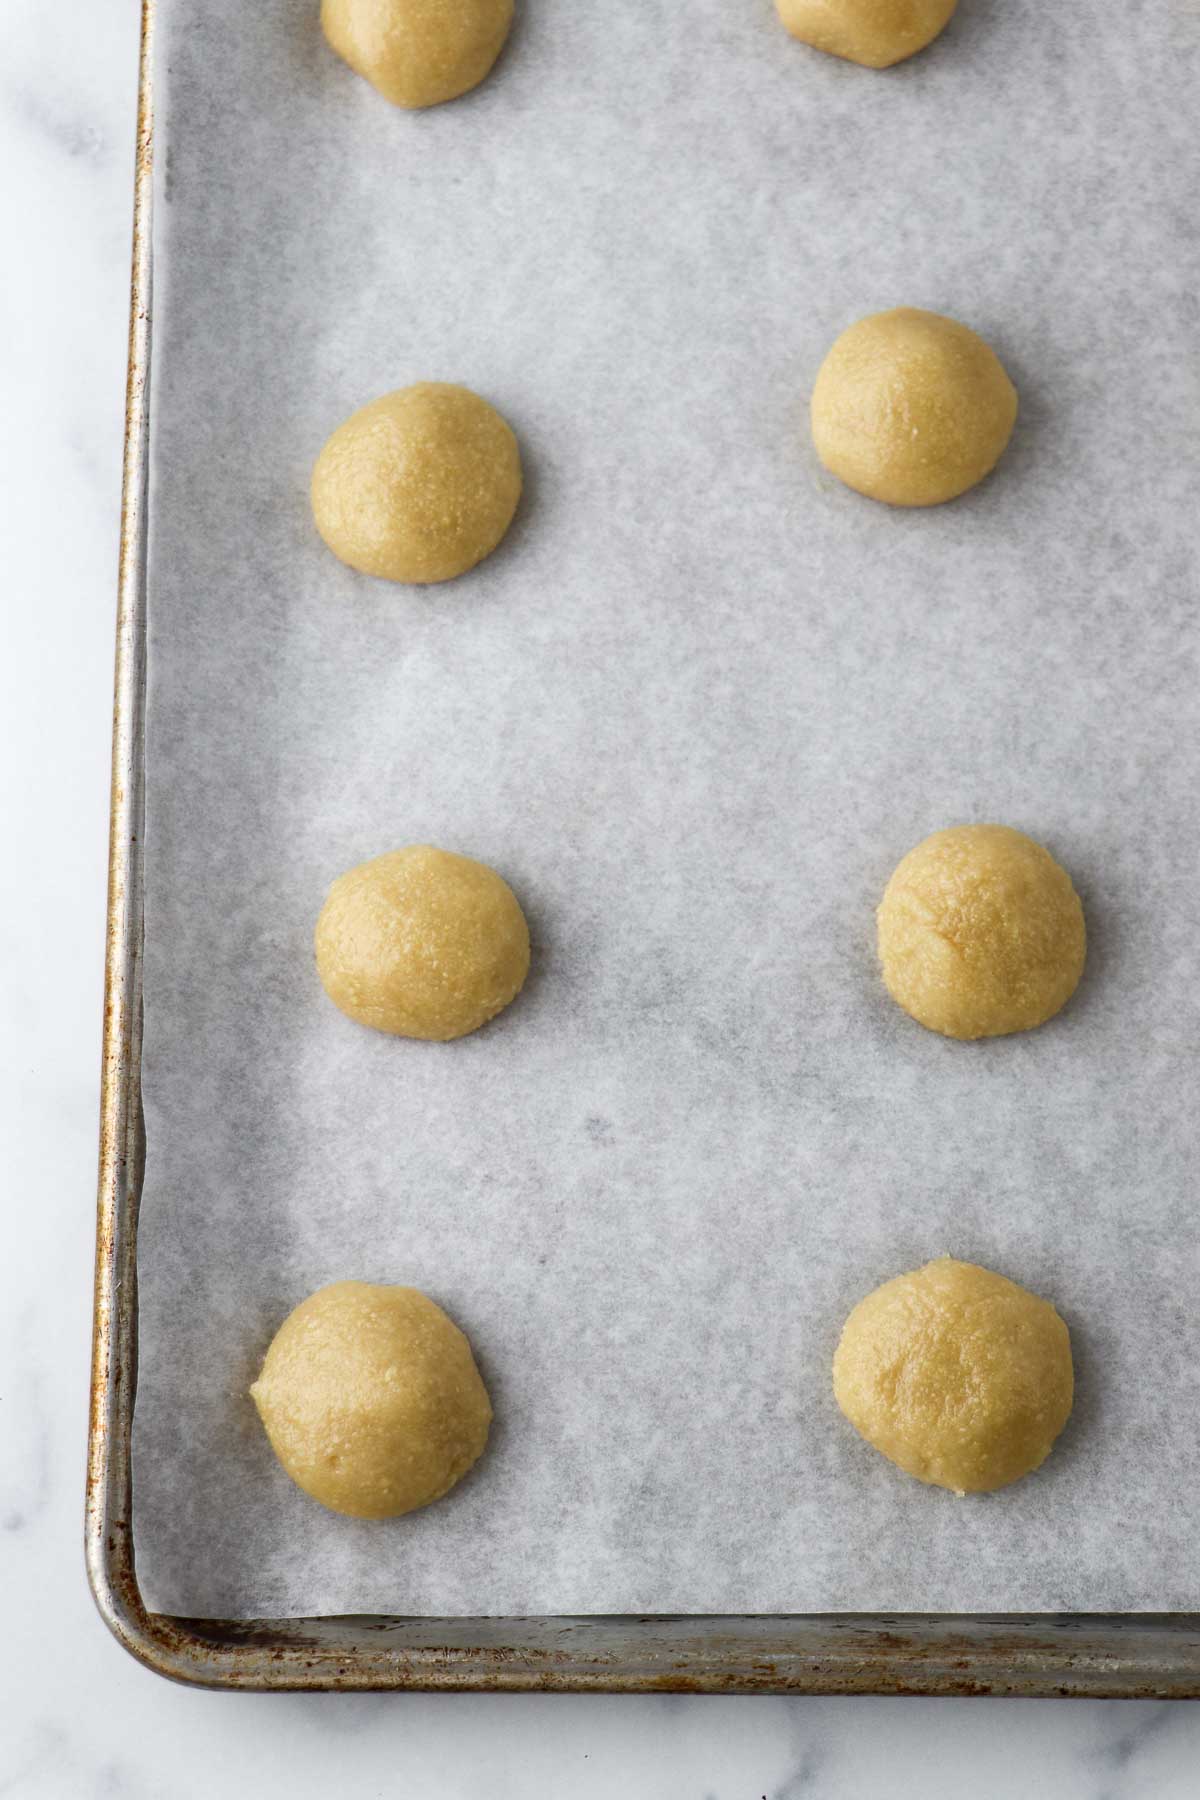 Unbaked Almond Macaroons on a baking sheet.